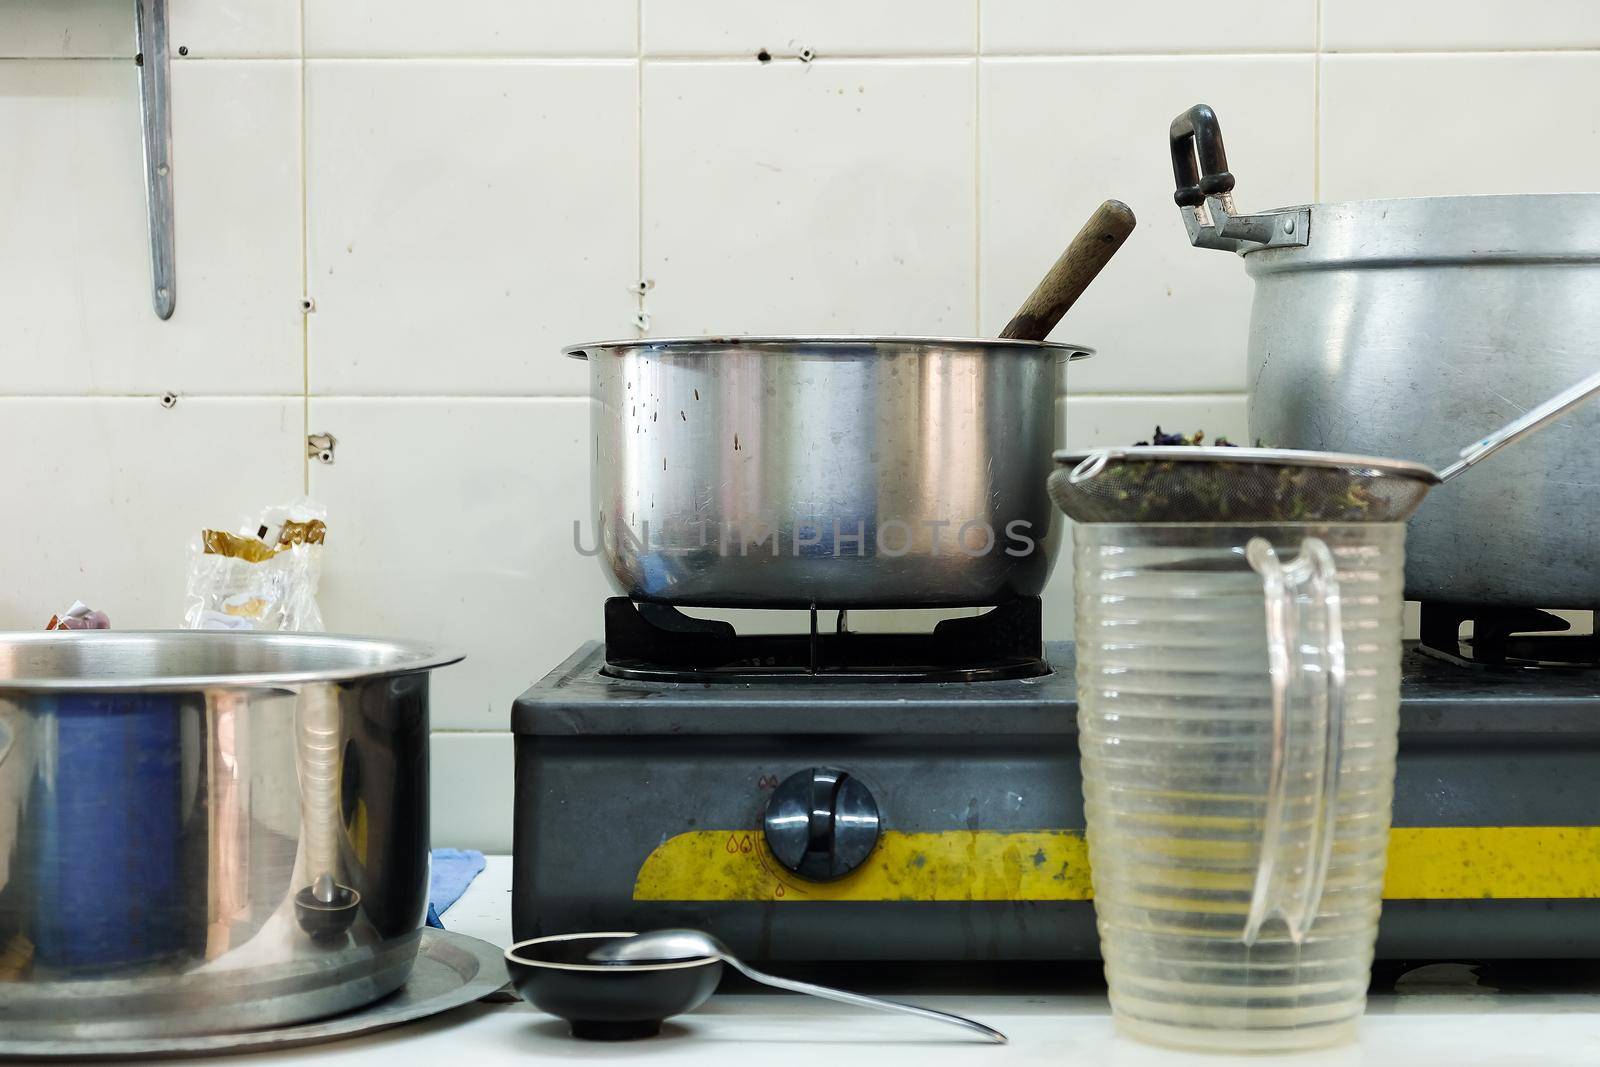 image of Cooking food on kitchen with steel oven, pots